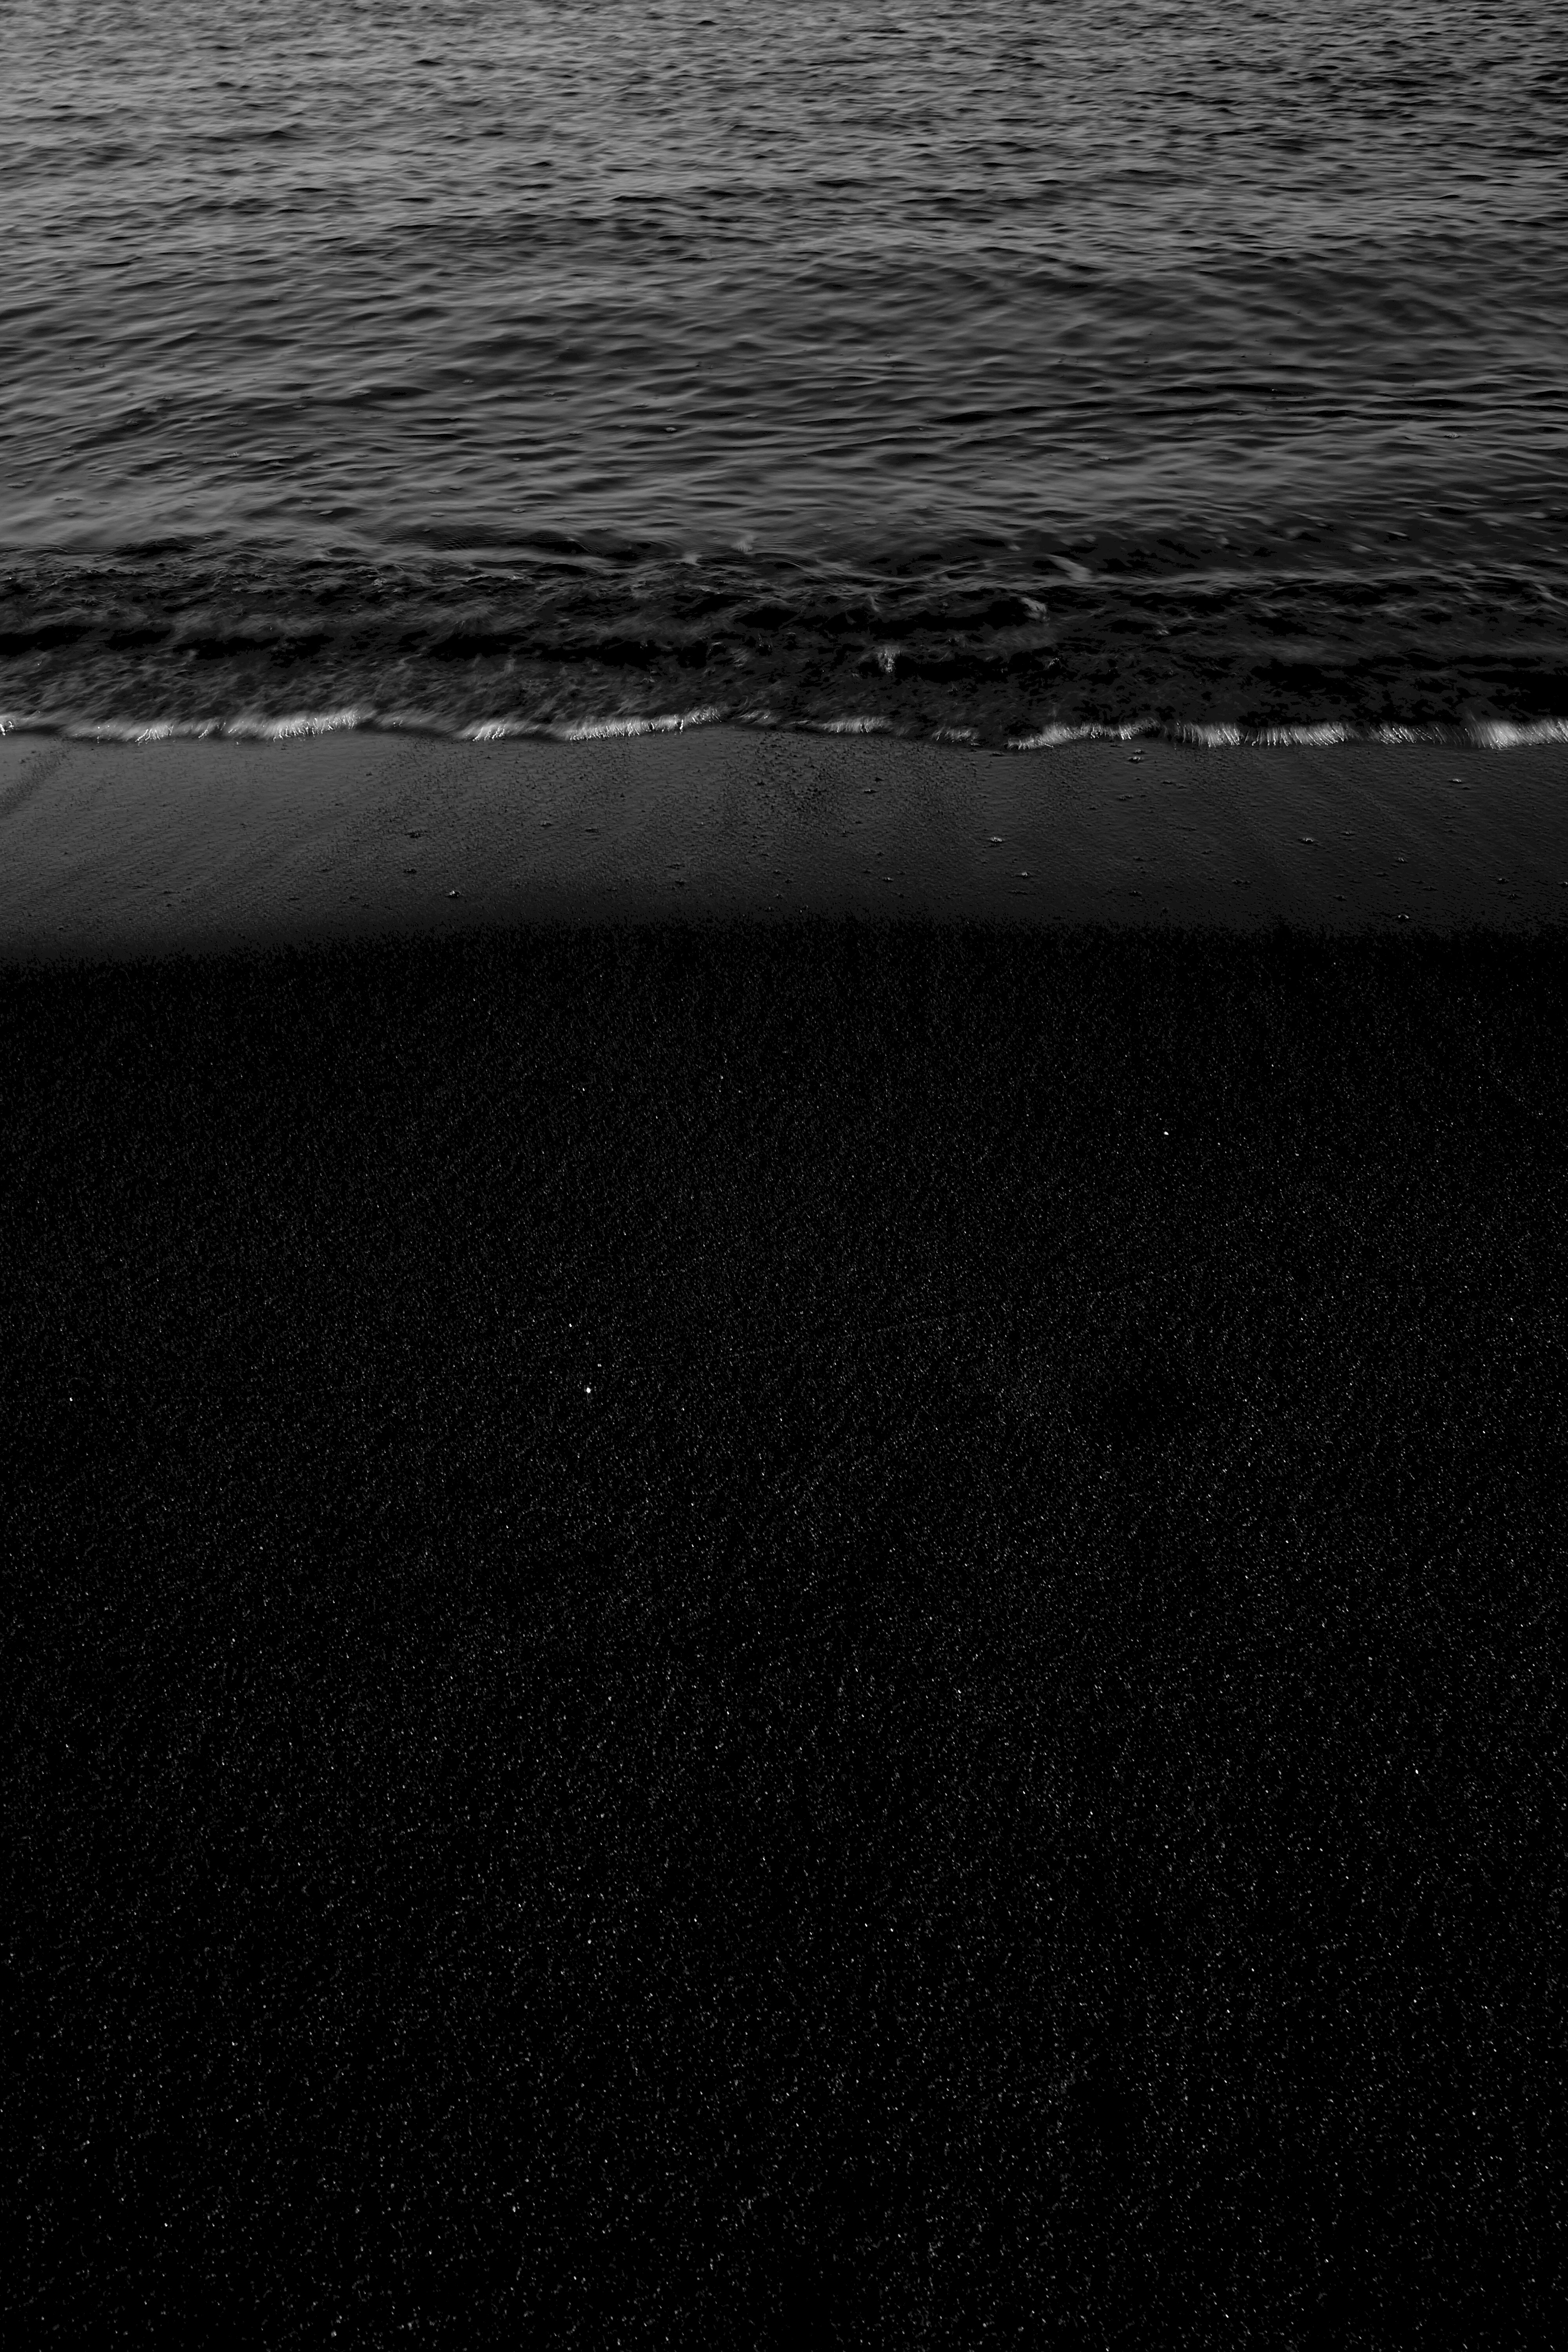 PC Wallpapers nature, shore, bank, ocean, bw, chb, surf, wave